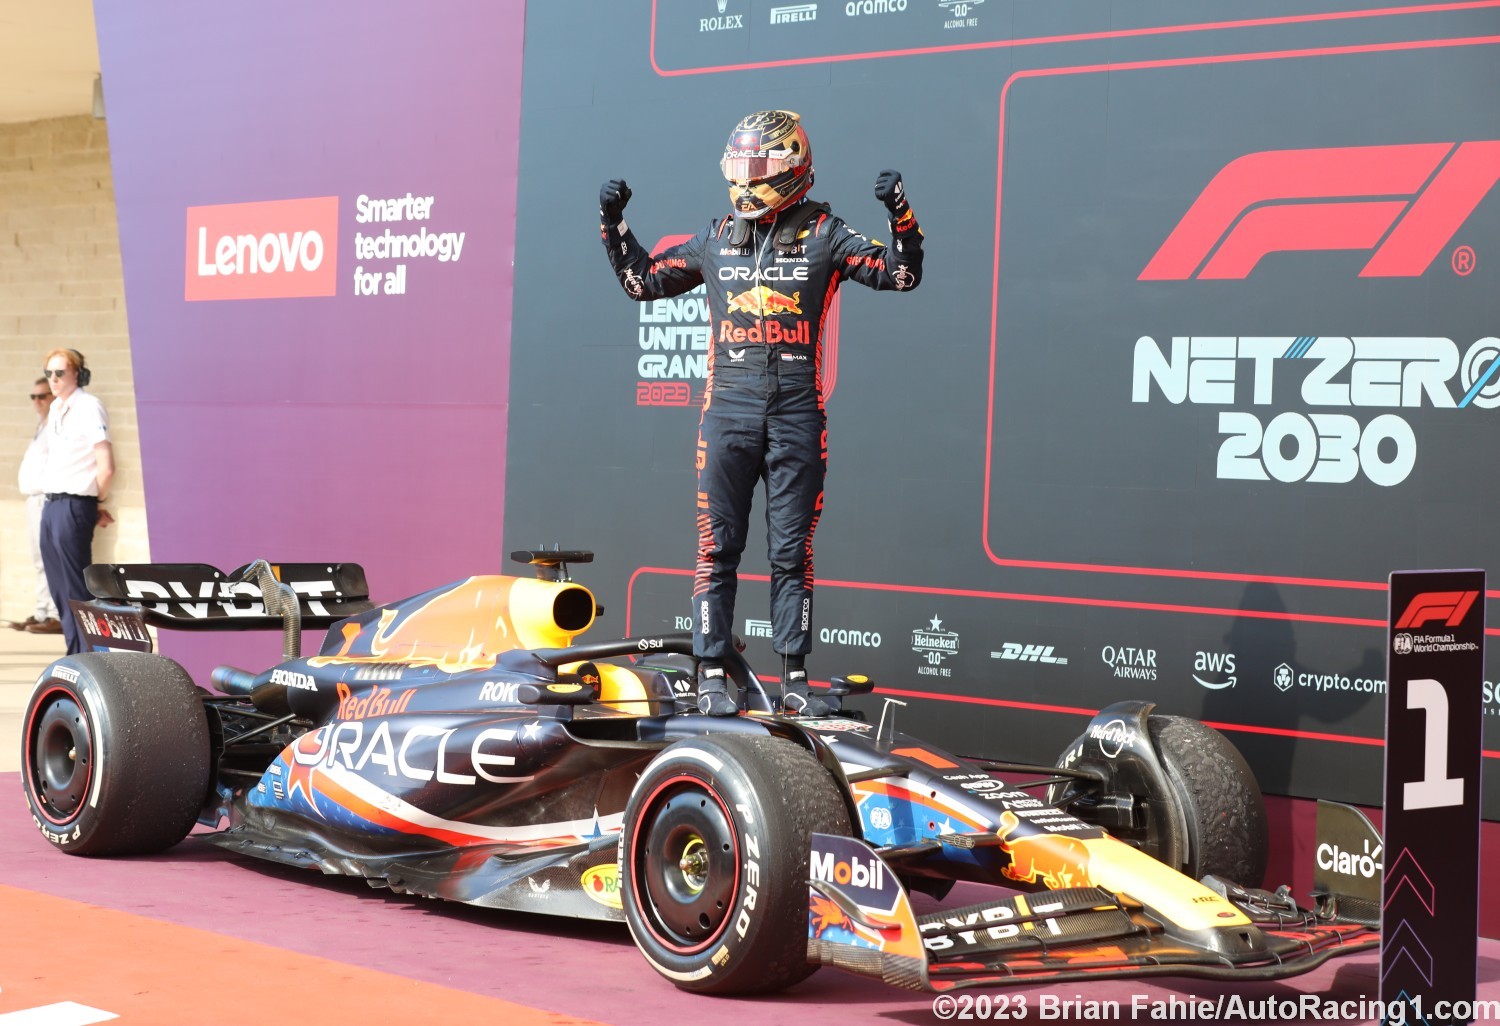 Max Verstappen celebrates on top of his car